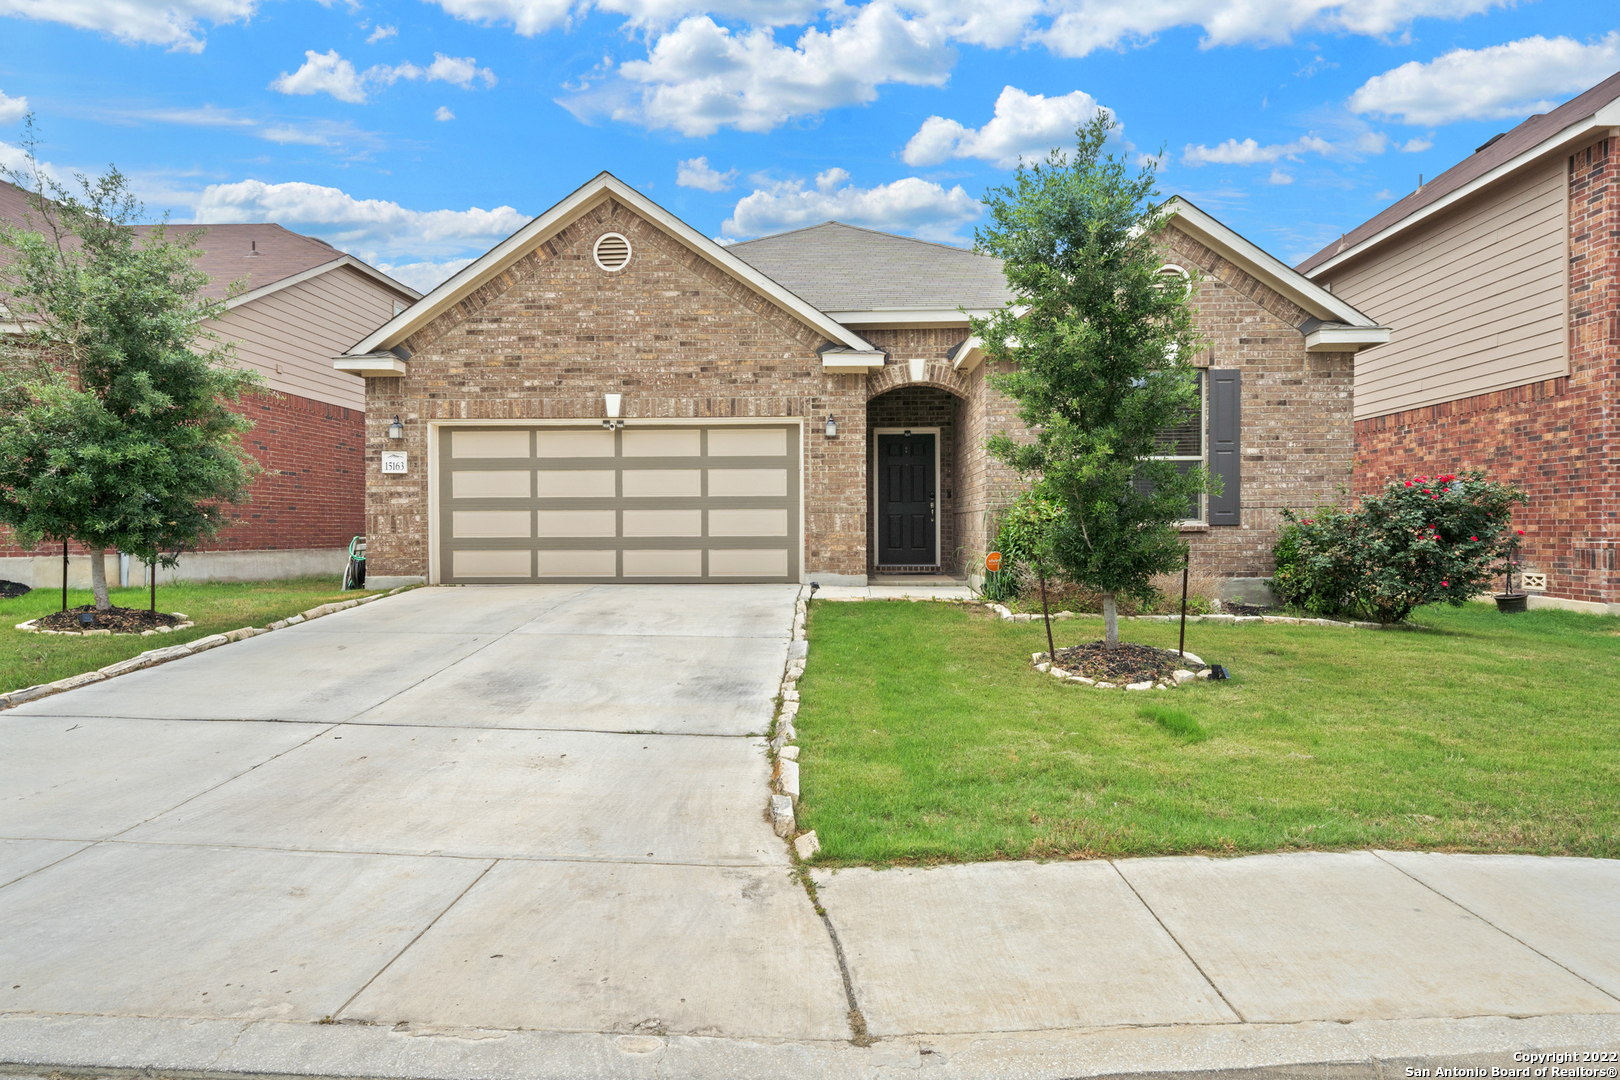 Amazing opportunity in the Texas Research Park community! Lovely 1-story home boasts 3 bedrooms, 2.5 baths, and a 2-car garage with a comfortable 2006 sq. ft. to feel at ease. Enter an open floor plan with a large living area, eat-in breakfast space, and a gorgeous kitchen featuring tiled backsplash, over-sized island, granite countertops, stainless steel appliances, and beautiful cabinetry. This beauty features a large owner's suite with a shower/tub combination and a double vanity, a study, and 2 secondary bedrooms. The backyard has an amazing, covered patio with ample privacy and is perfect for entertaining friends and family.  This immaculately maintained home is close to JBSA-Lackland and Fort Sam Houston, brand new HEB grocery store, eating establishments, shopping, and easy access to all major highways.  Do not miss out on this one, it will not last long!!